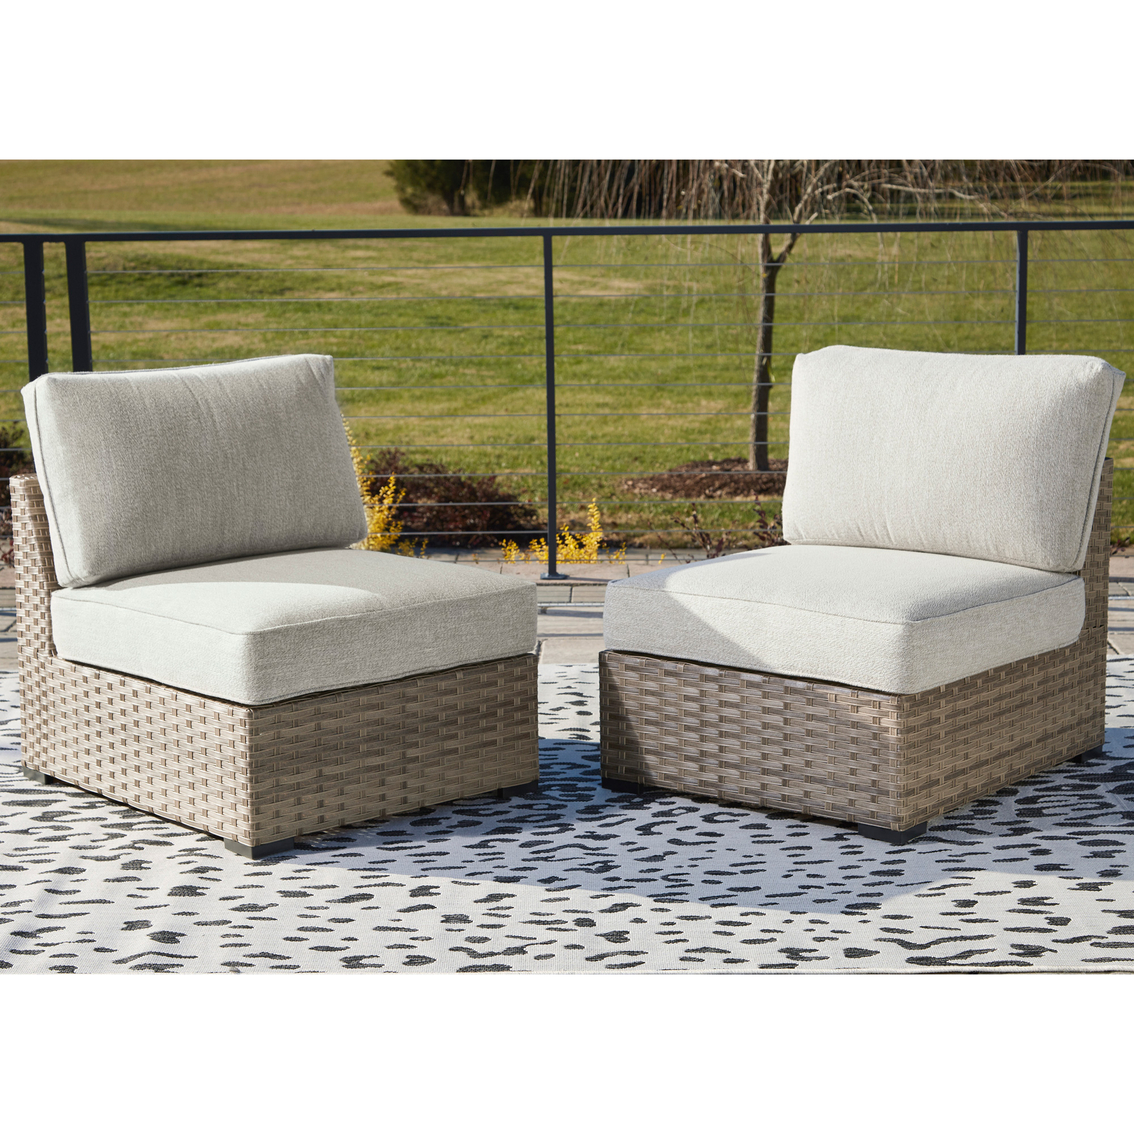 Signature Design by Ashley Calworth Outdoor 6 pc. Set with Firepit Table - Image 3 of 9